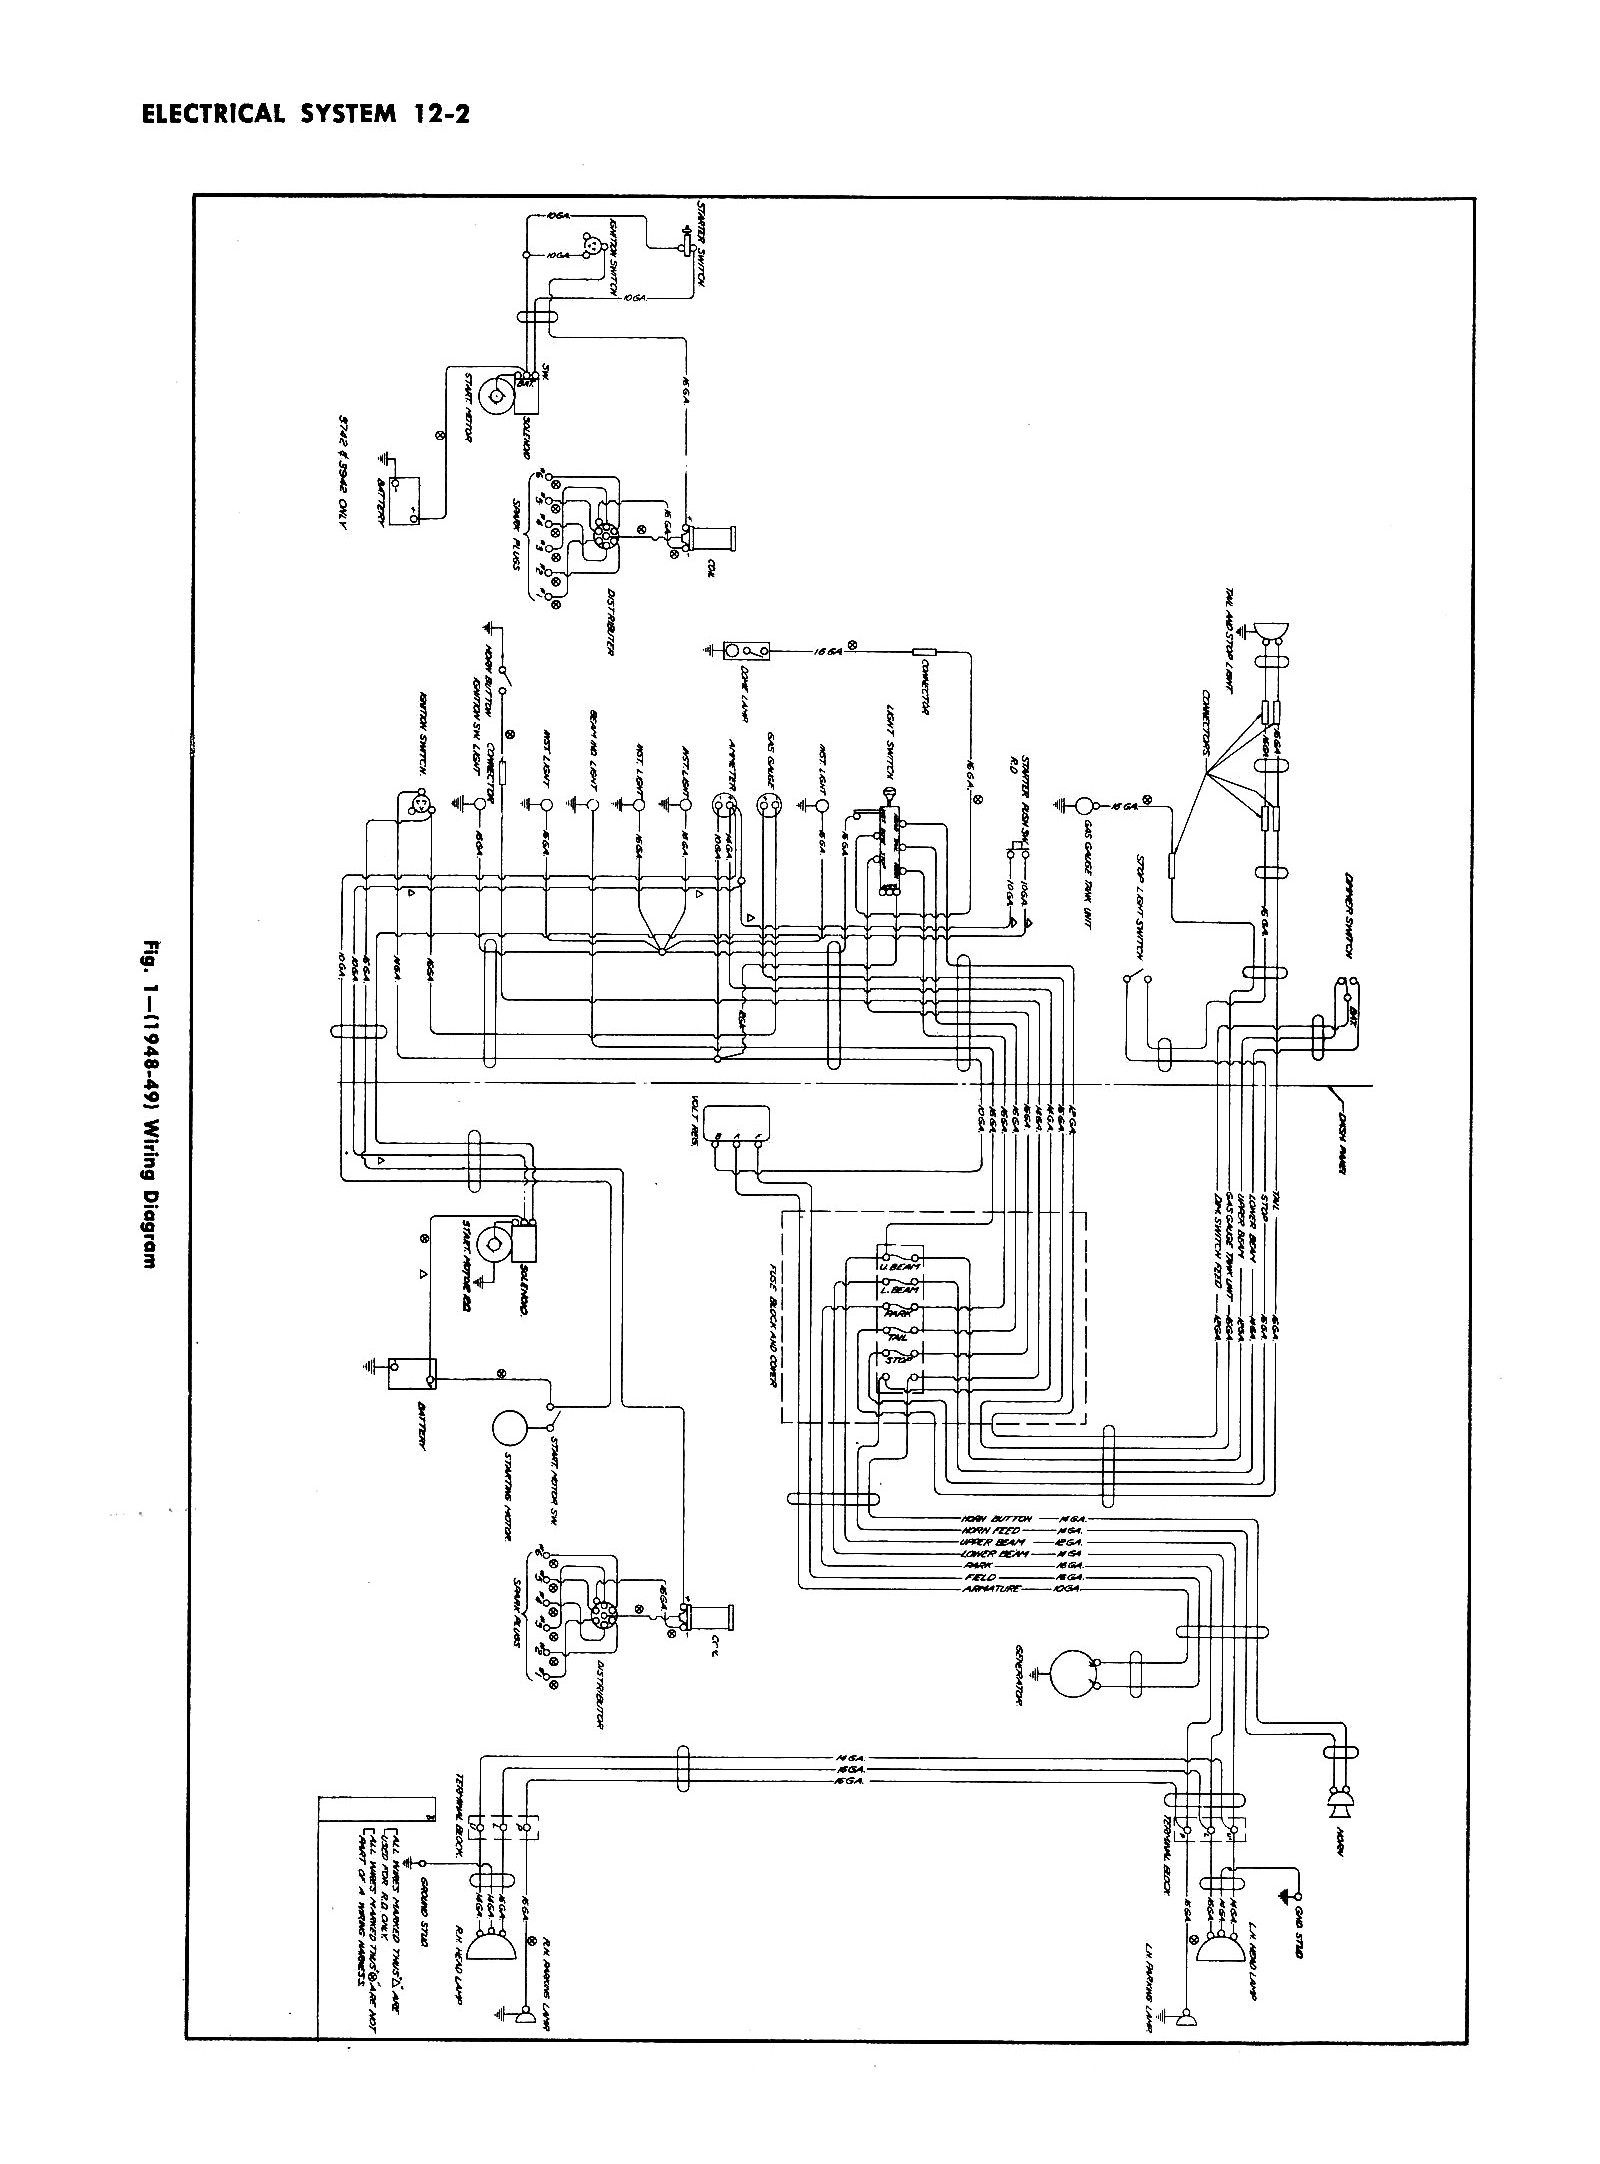 55 Chevy Truck Wiring Diagram | Manual E-Books - Chevy Steering Column Wiring Diagram